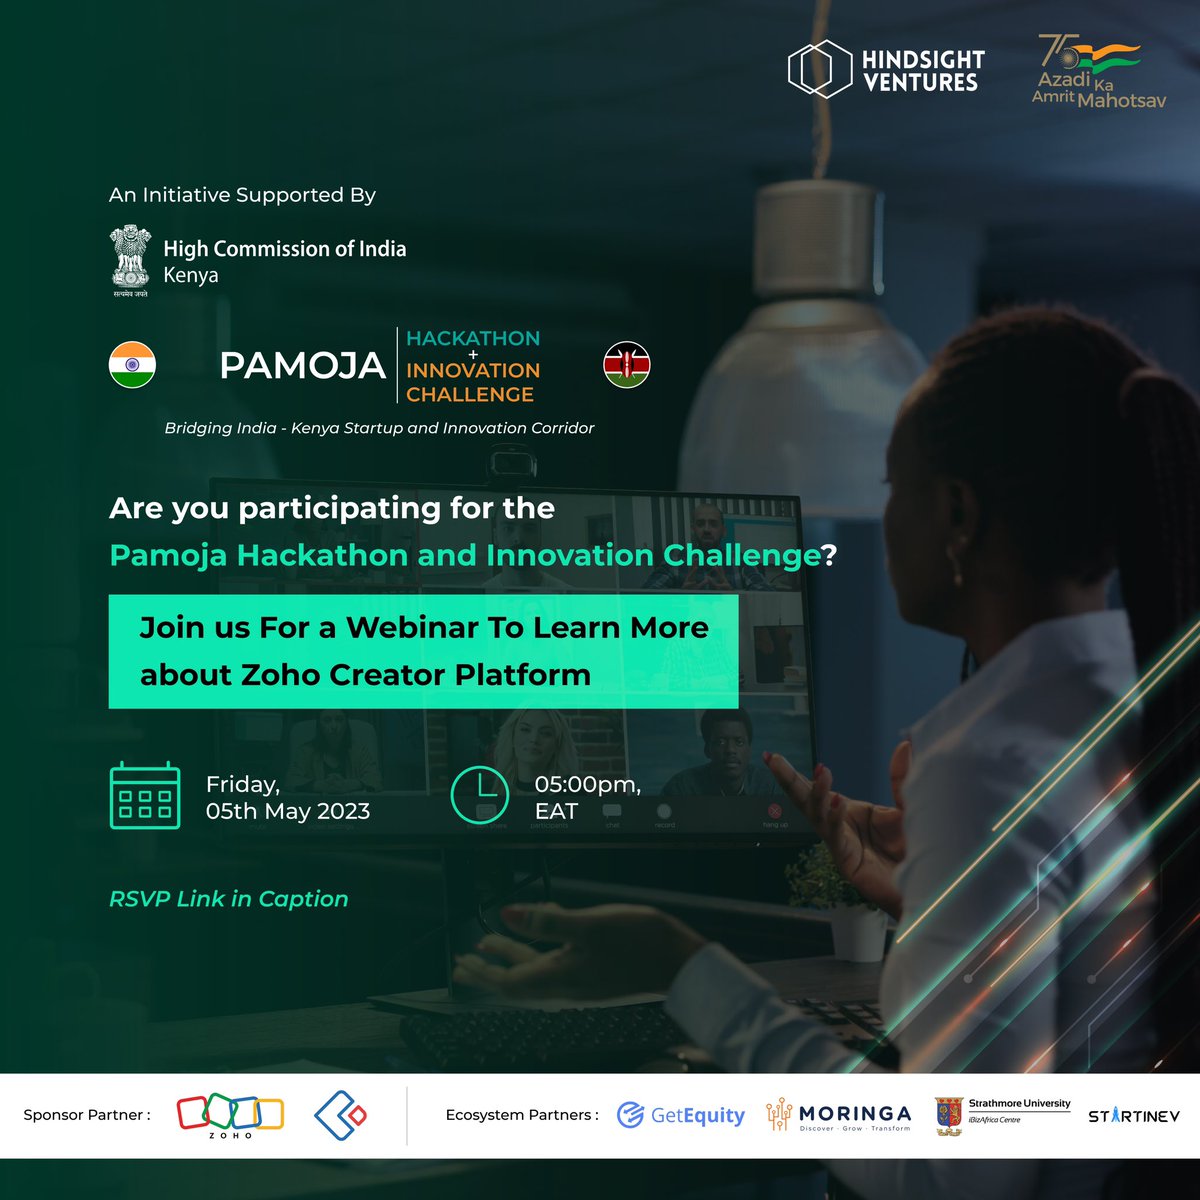 We would now like to invite you to attend the Information Webinar of @ZohoCreator platform that will be used for the Pamoja Hackathon & Innovation Challenge 

When: Friday, 5th May 2023 at 5pm EAT.

RSVP here :lnkd.in/dRJVUu4Y

#Pamoja #Hackathon2023 #InnovationChallenge